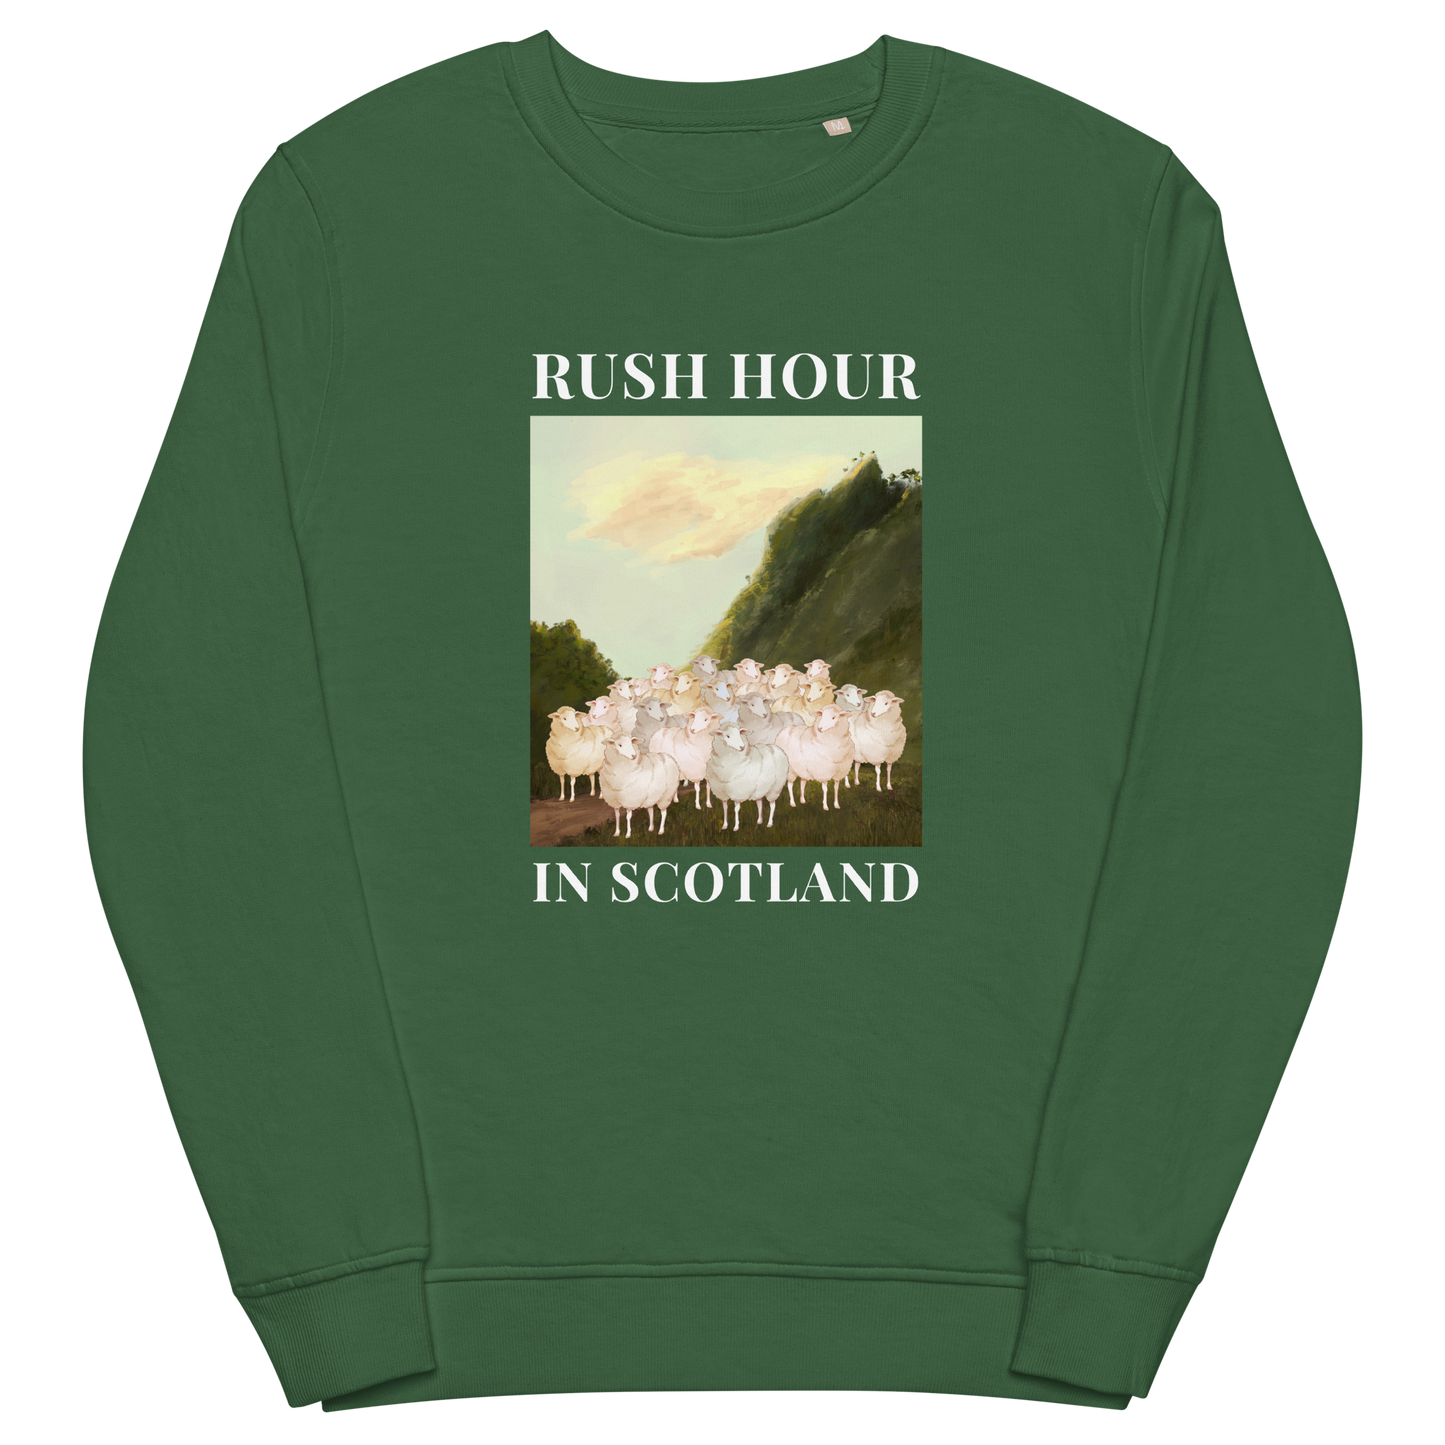 Bottle Green Sheep Organic Sweatshirt featuring a comical Rush Hour In Scotland graphic on the chest - Artsy & Funny Graphic Sheep Sweatshirts - Boozy Fox